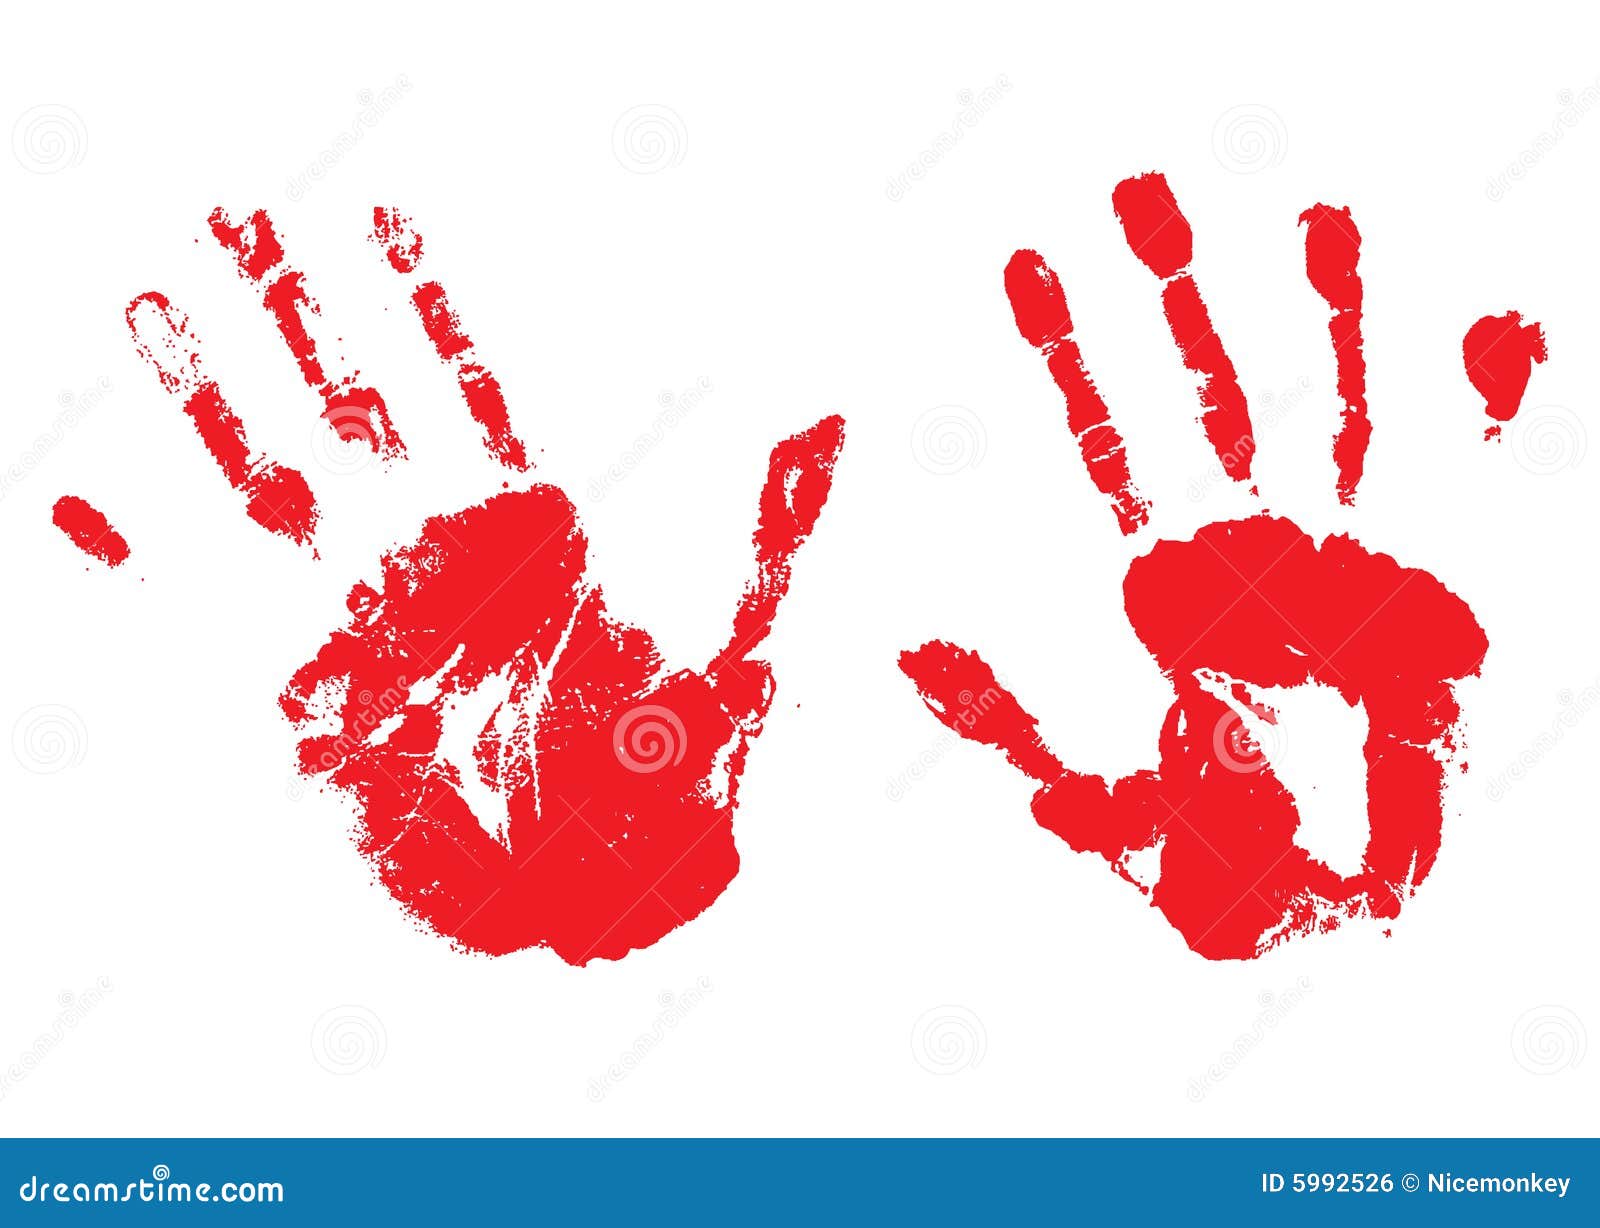 clipart bloody hand - photo #8